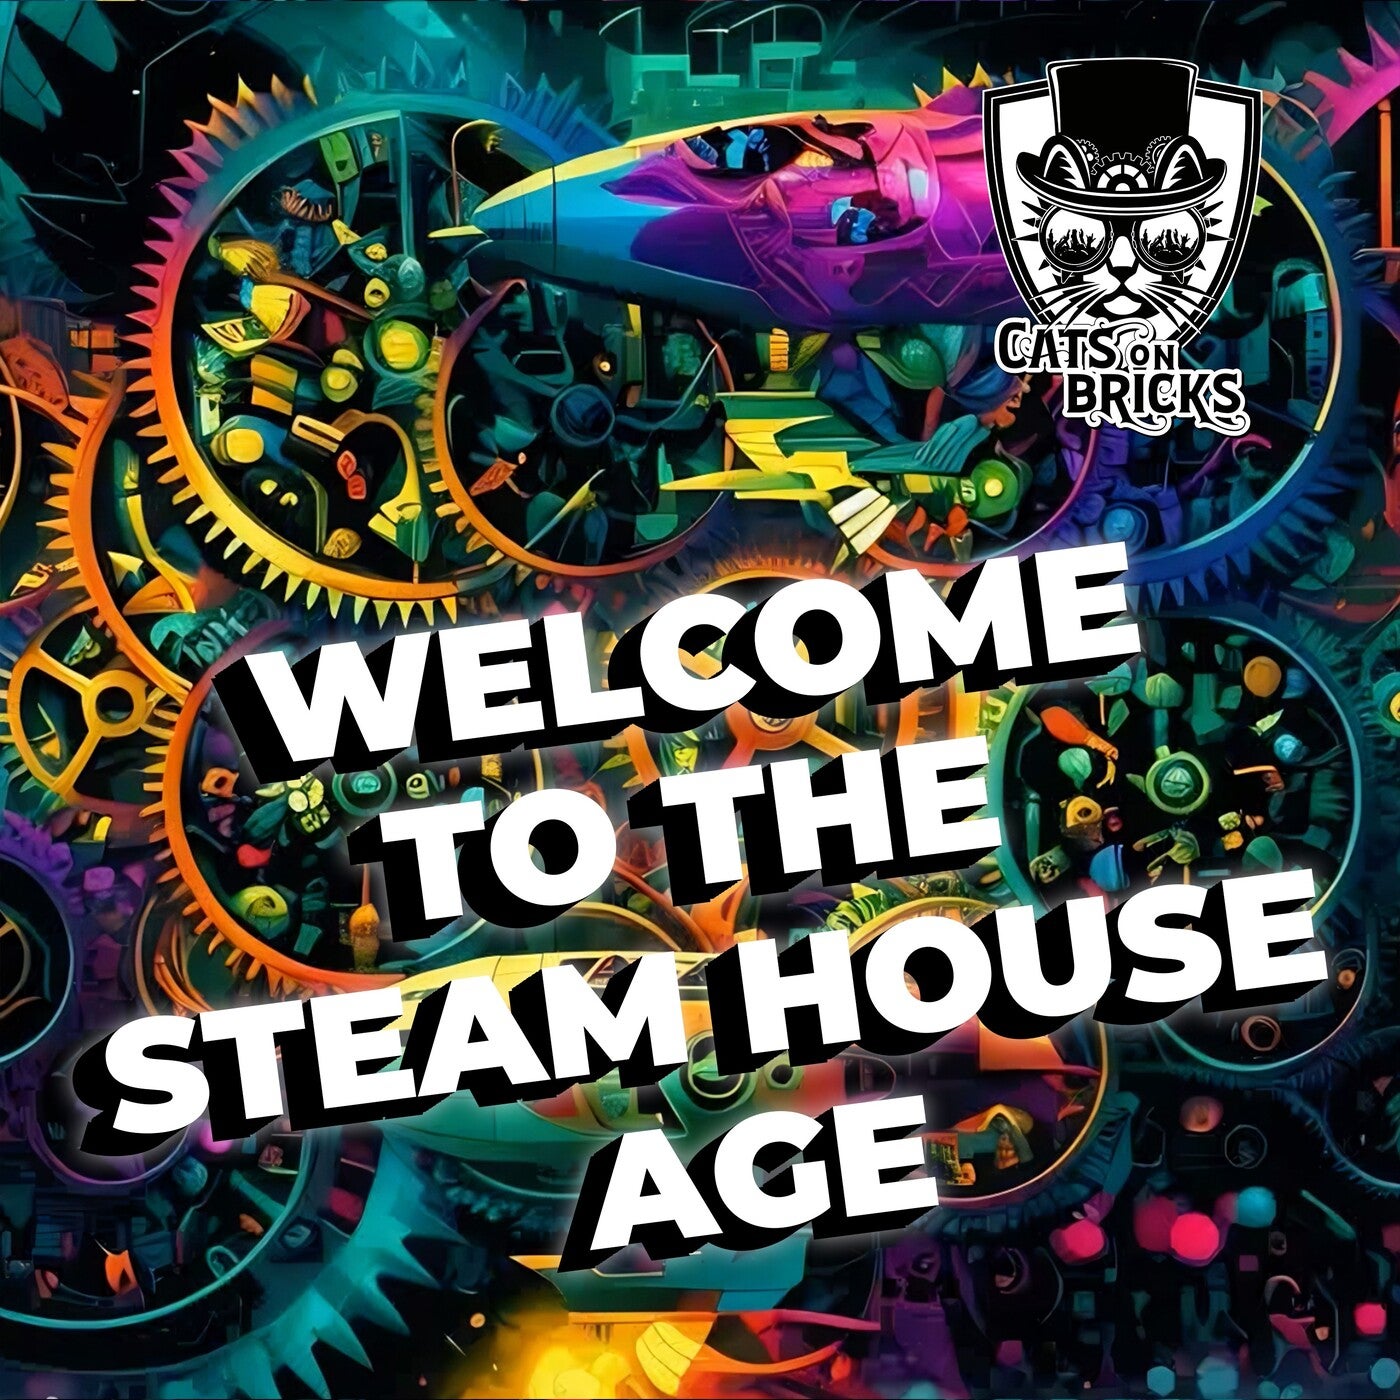 Welcome to the Steam House Age